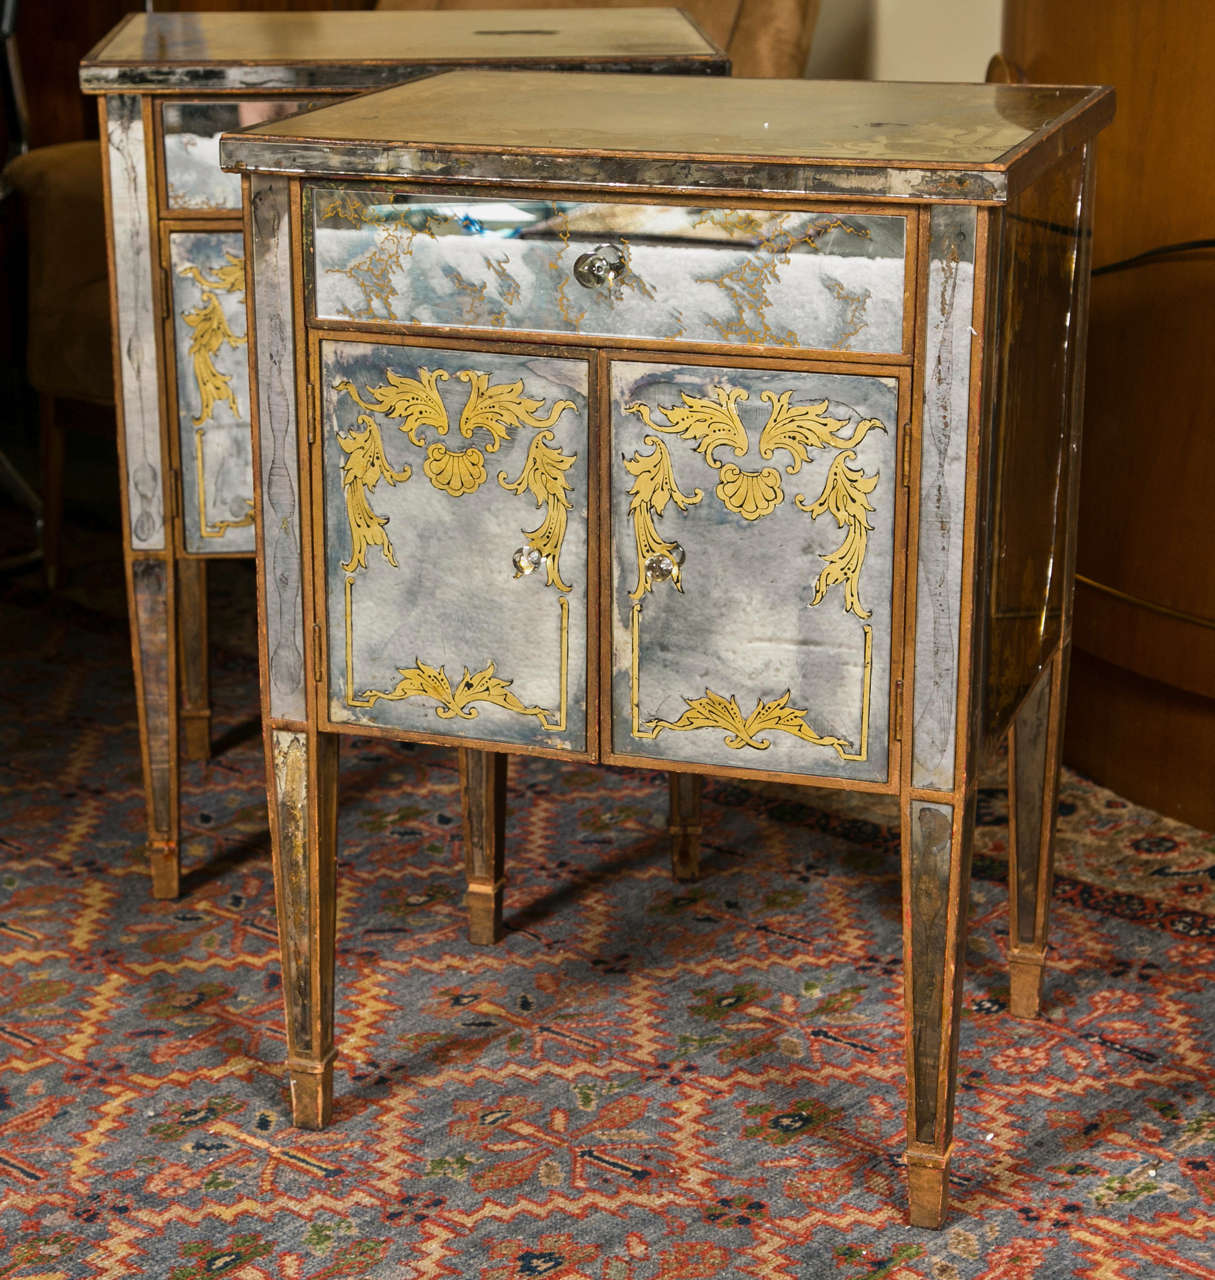 A fine Art Deco style distressed and gilded stand, circa 1940s, overall veneered with églomisé glass panels, decorated with glass sphere knobs, raised on squared tapering legs ending in pegged feet. Used in the HBO Series, Money.